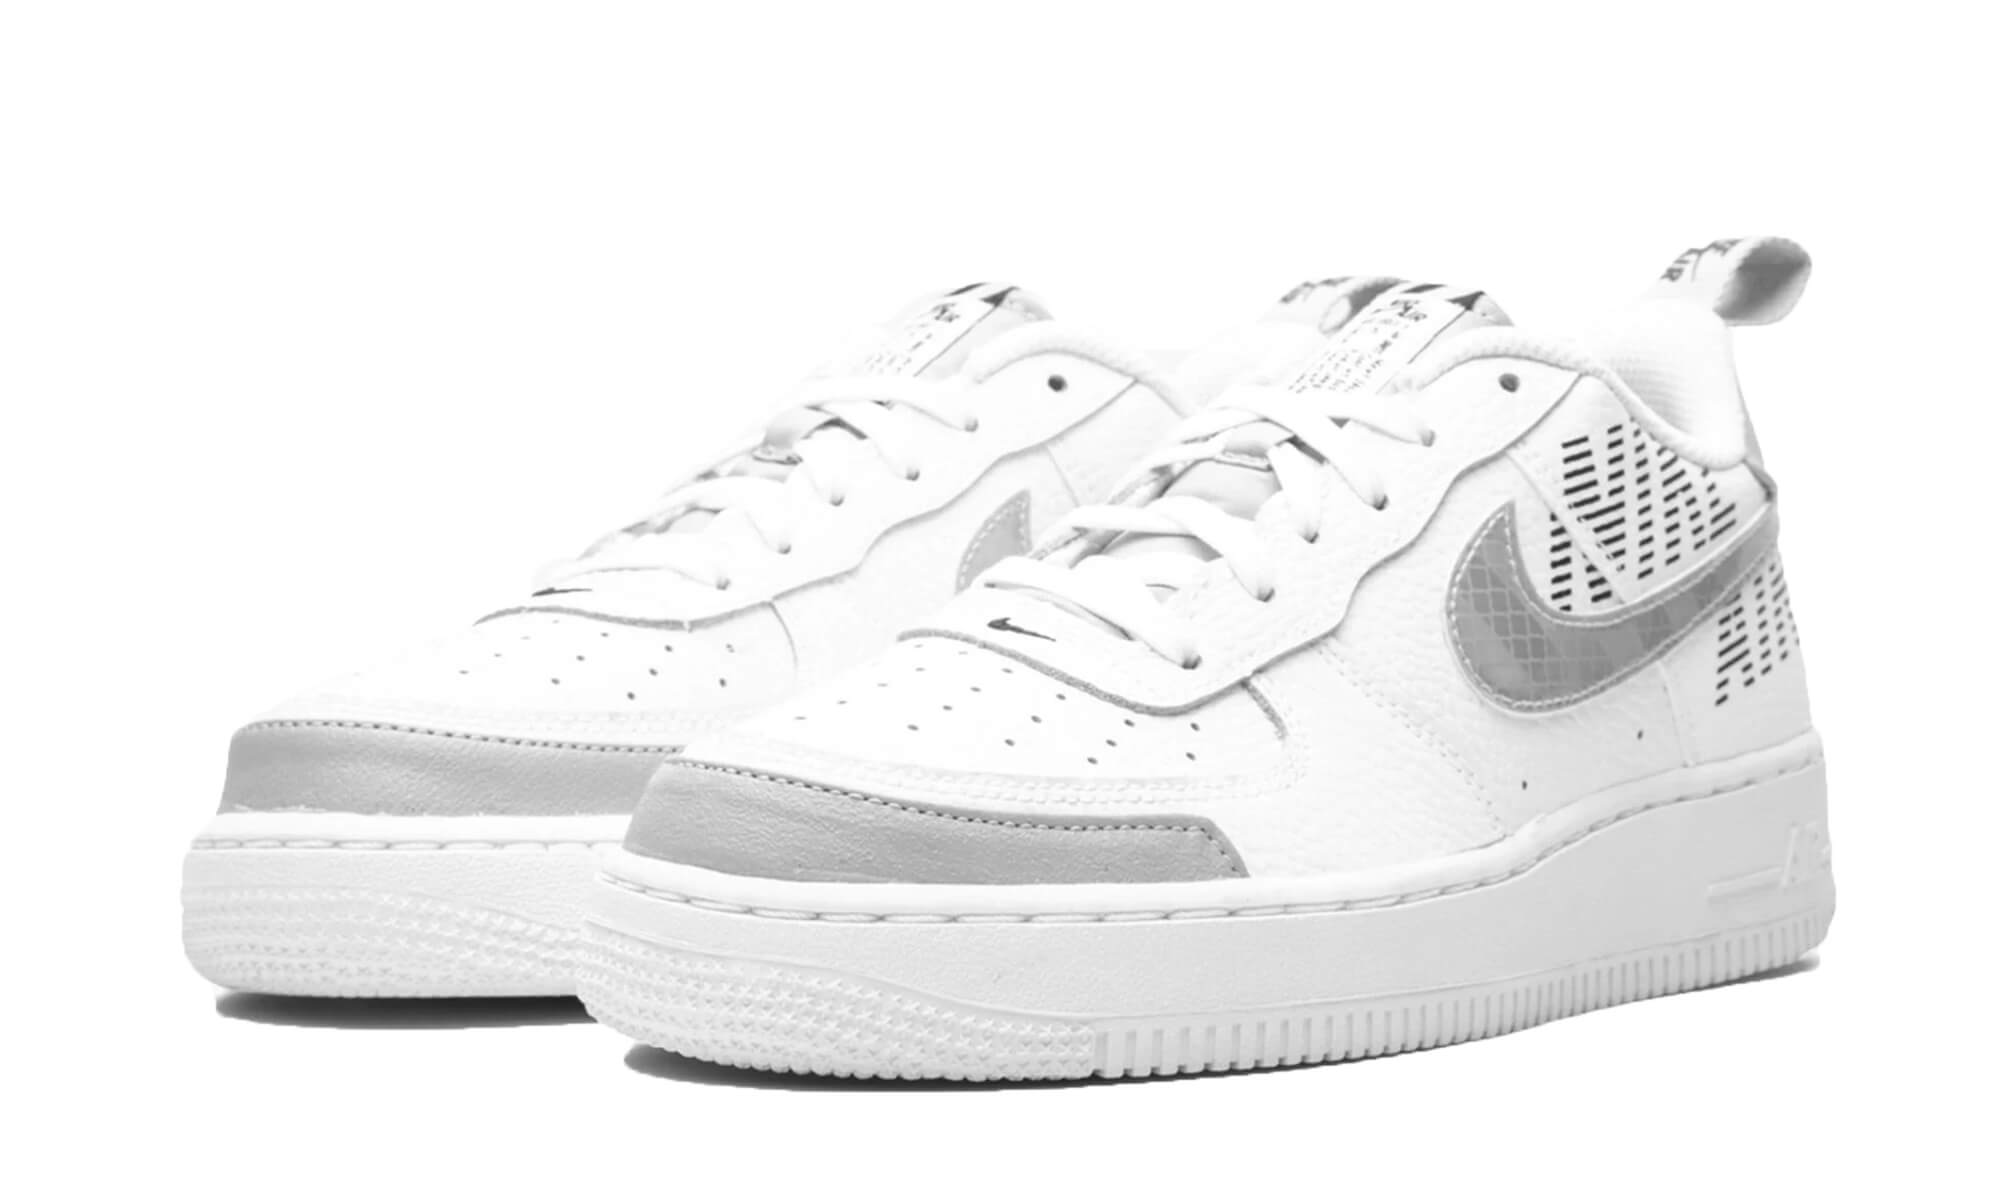 Nike Air Force 1 LV8 2 'White/Wolf Grey